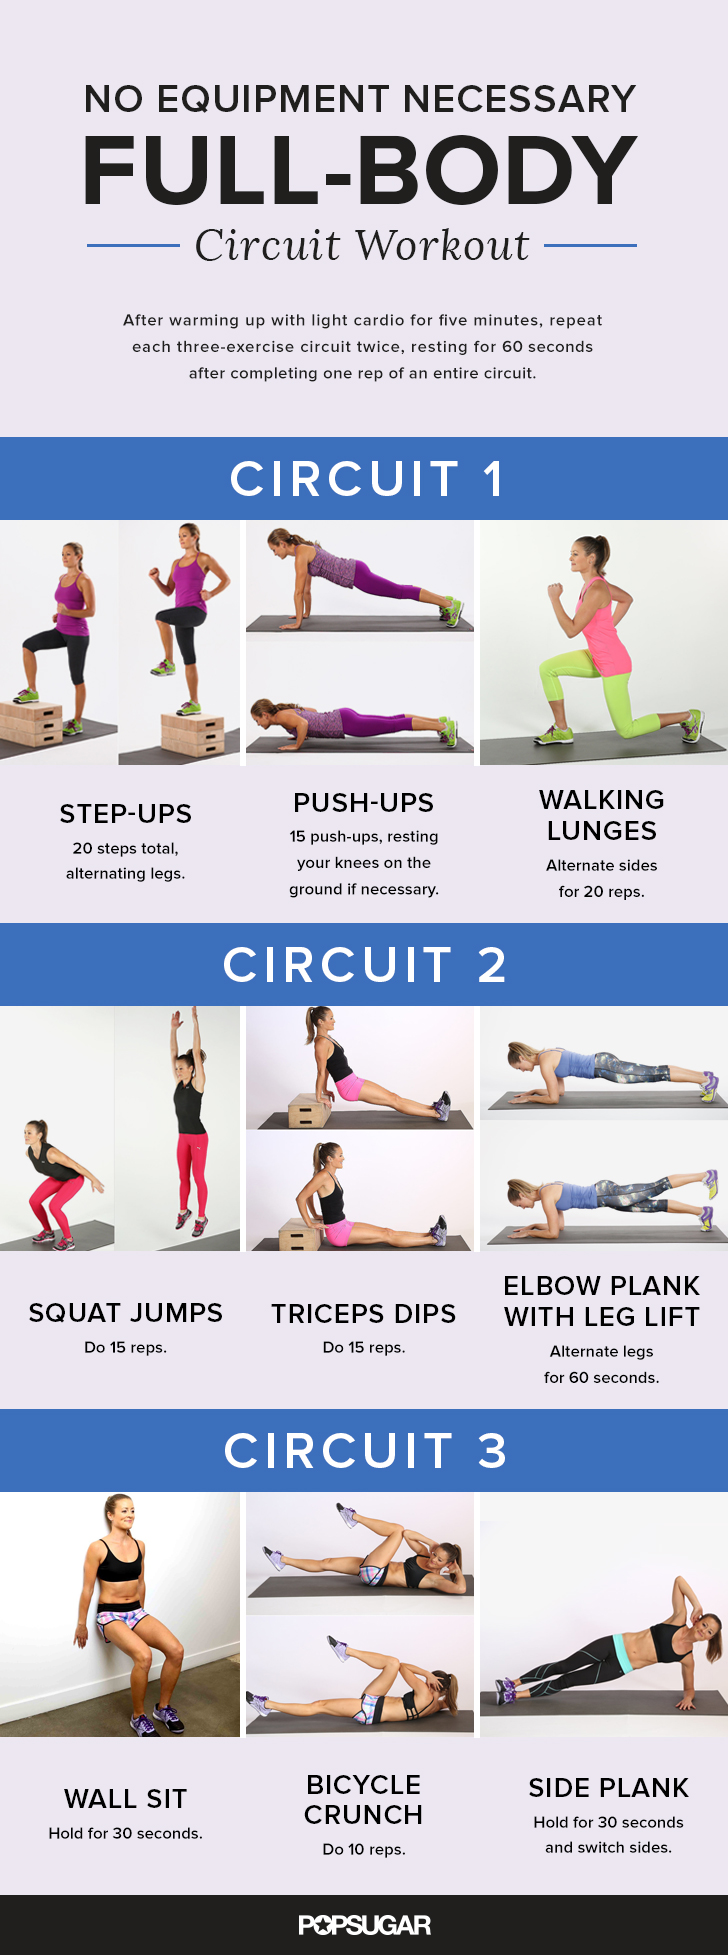 full body workout for weight loss at home